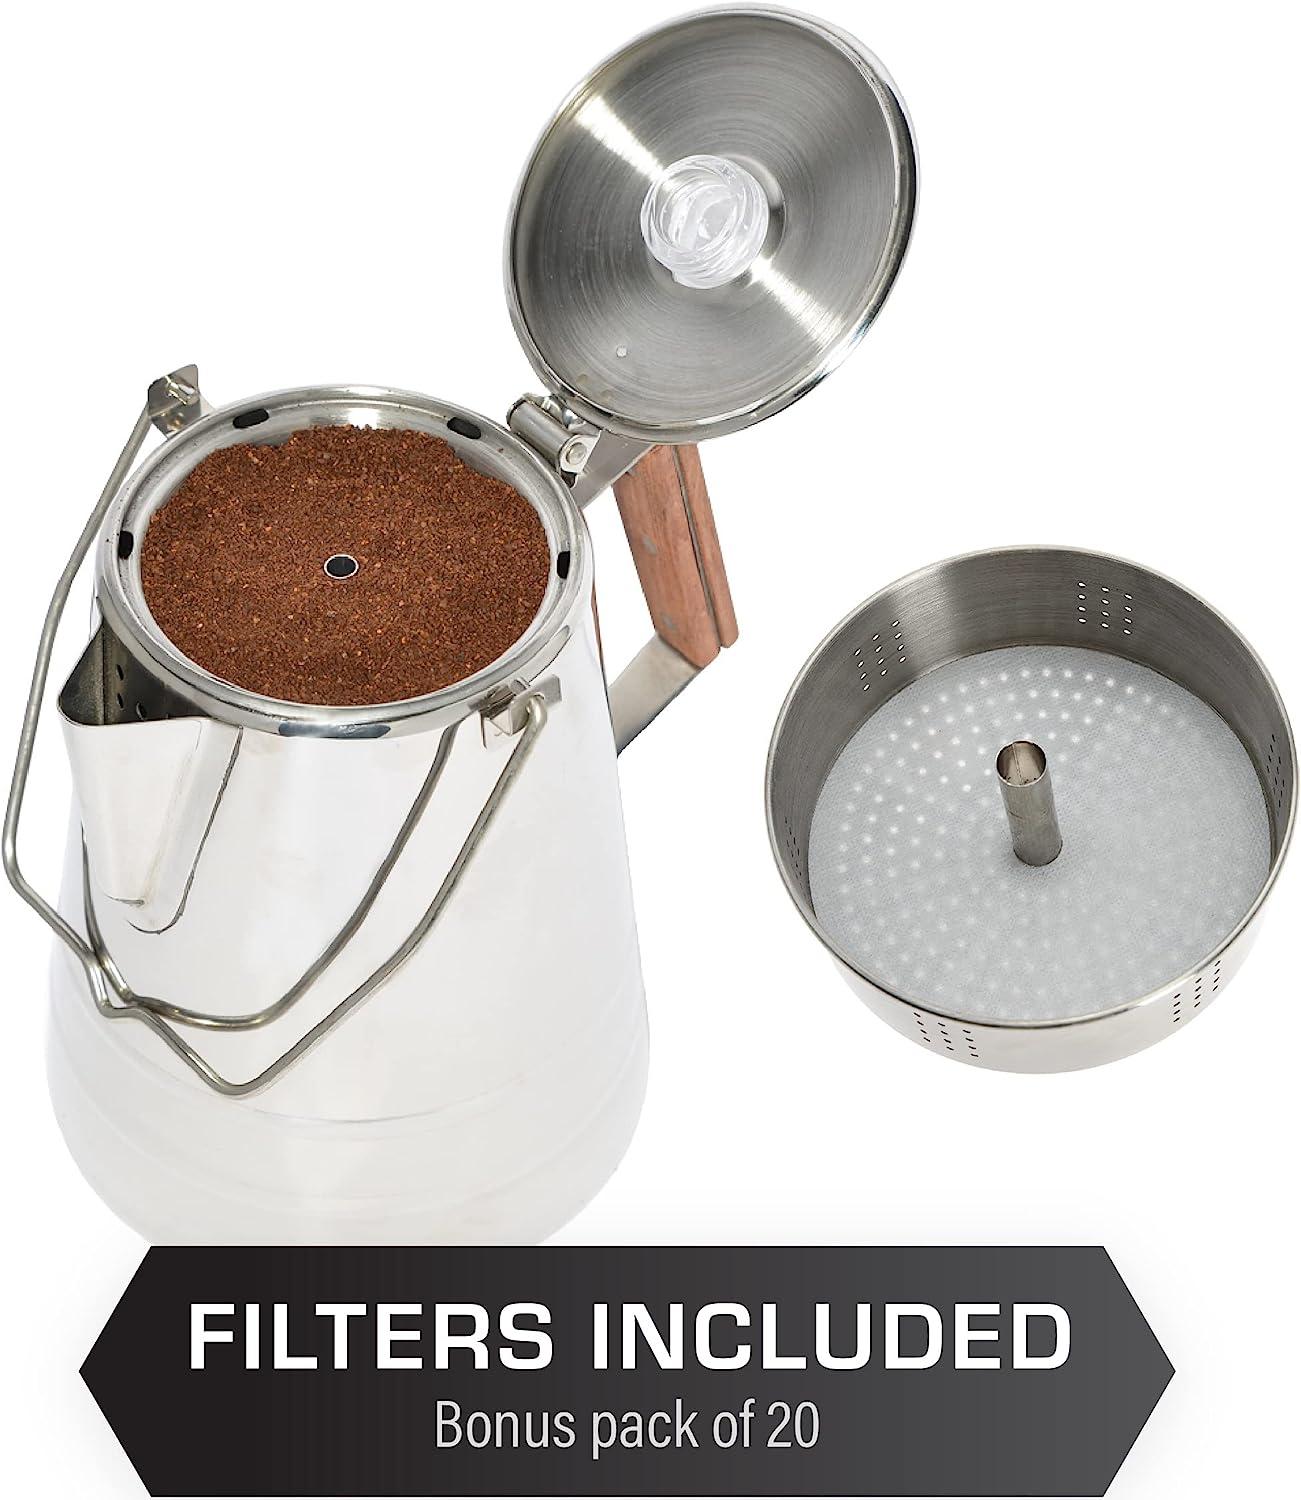 COLETTI Butte Camping Coffee Pot - Campfire Coffee Pot - Stainless Steel  Coff